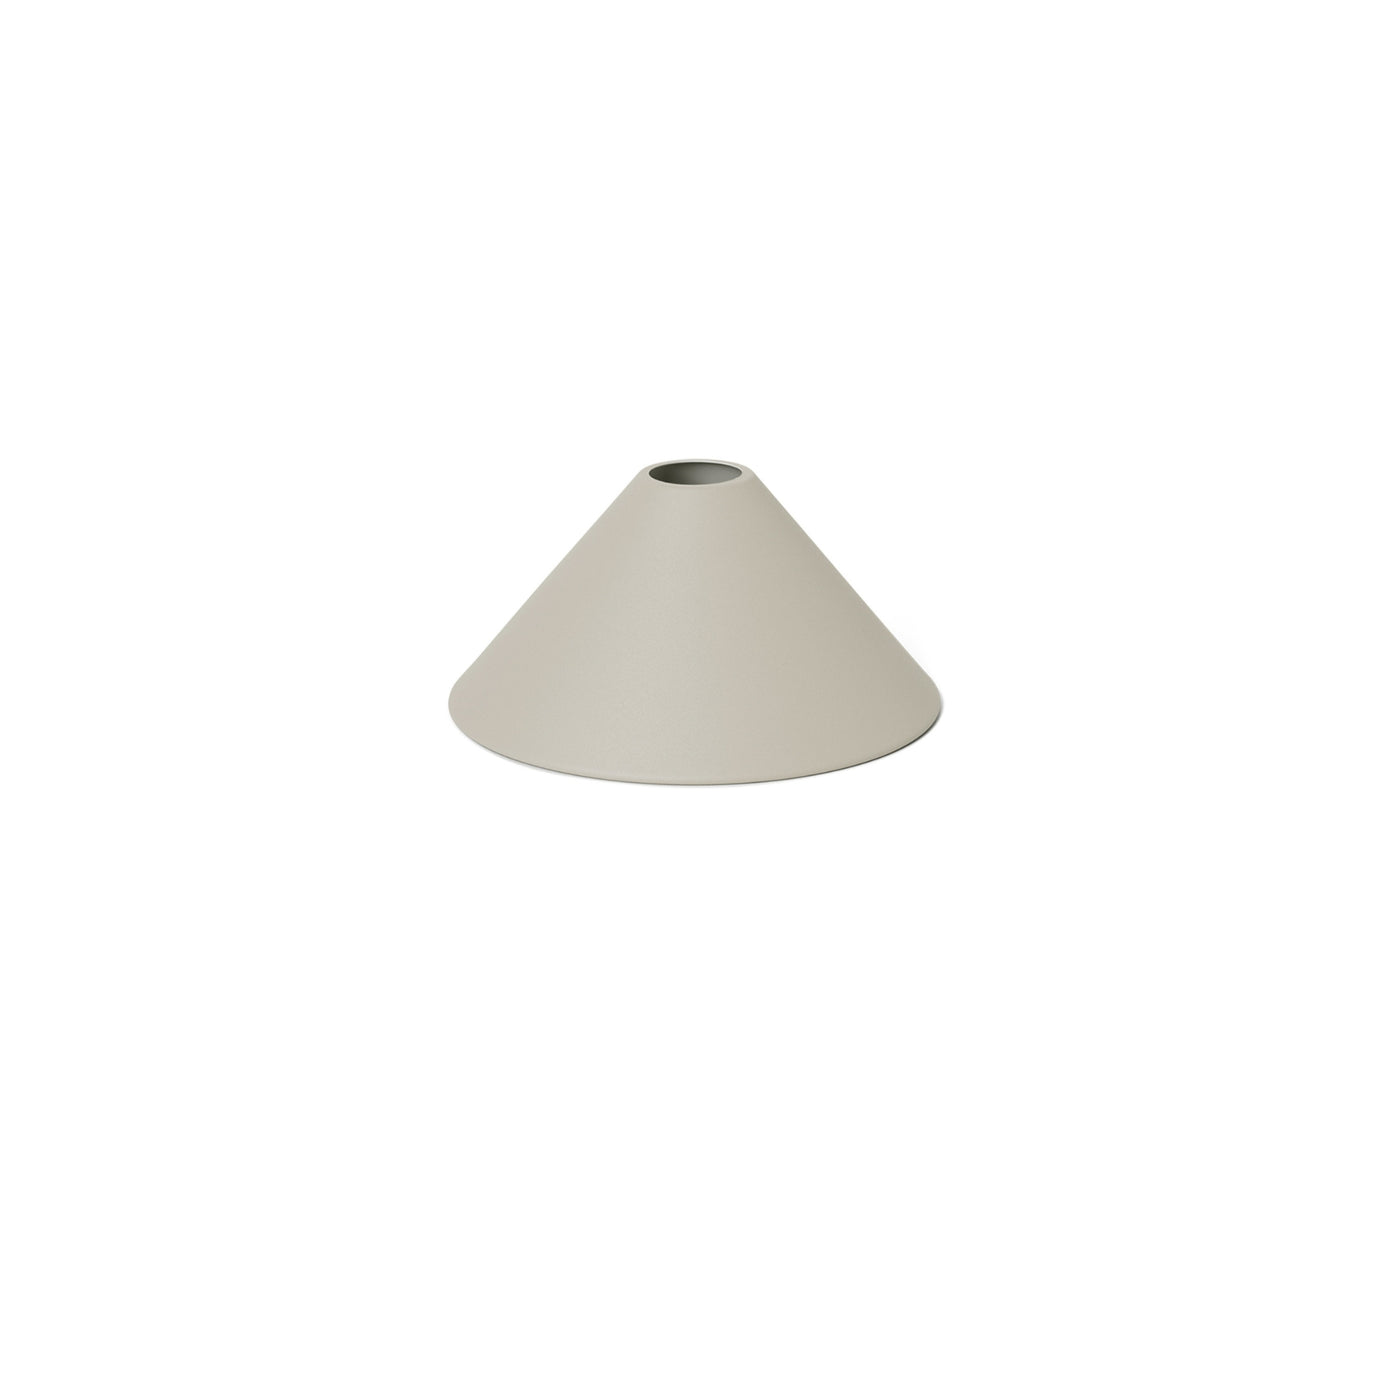 ferm LIVING Collect Lighting Cone Shade. Shop online at someday designs. #colour_light-grey